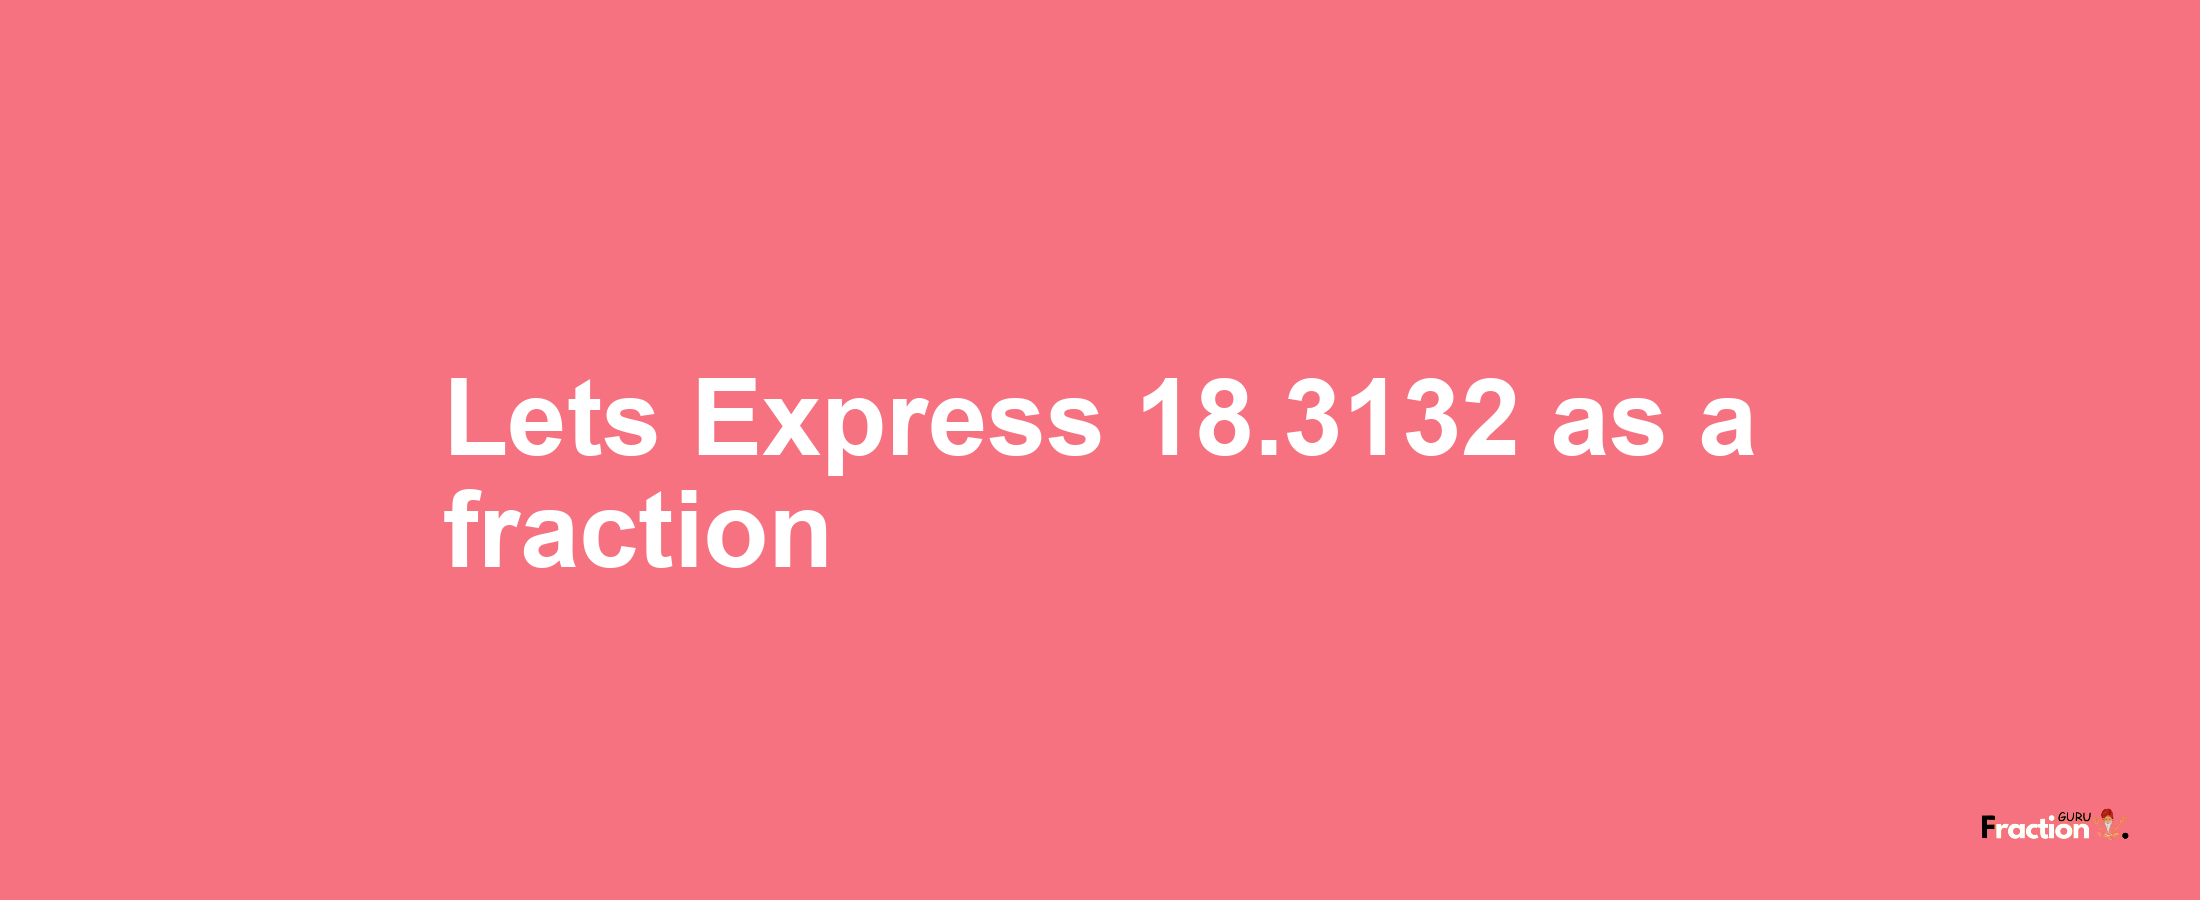 Lets Express 18.3132 as afraction